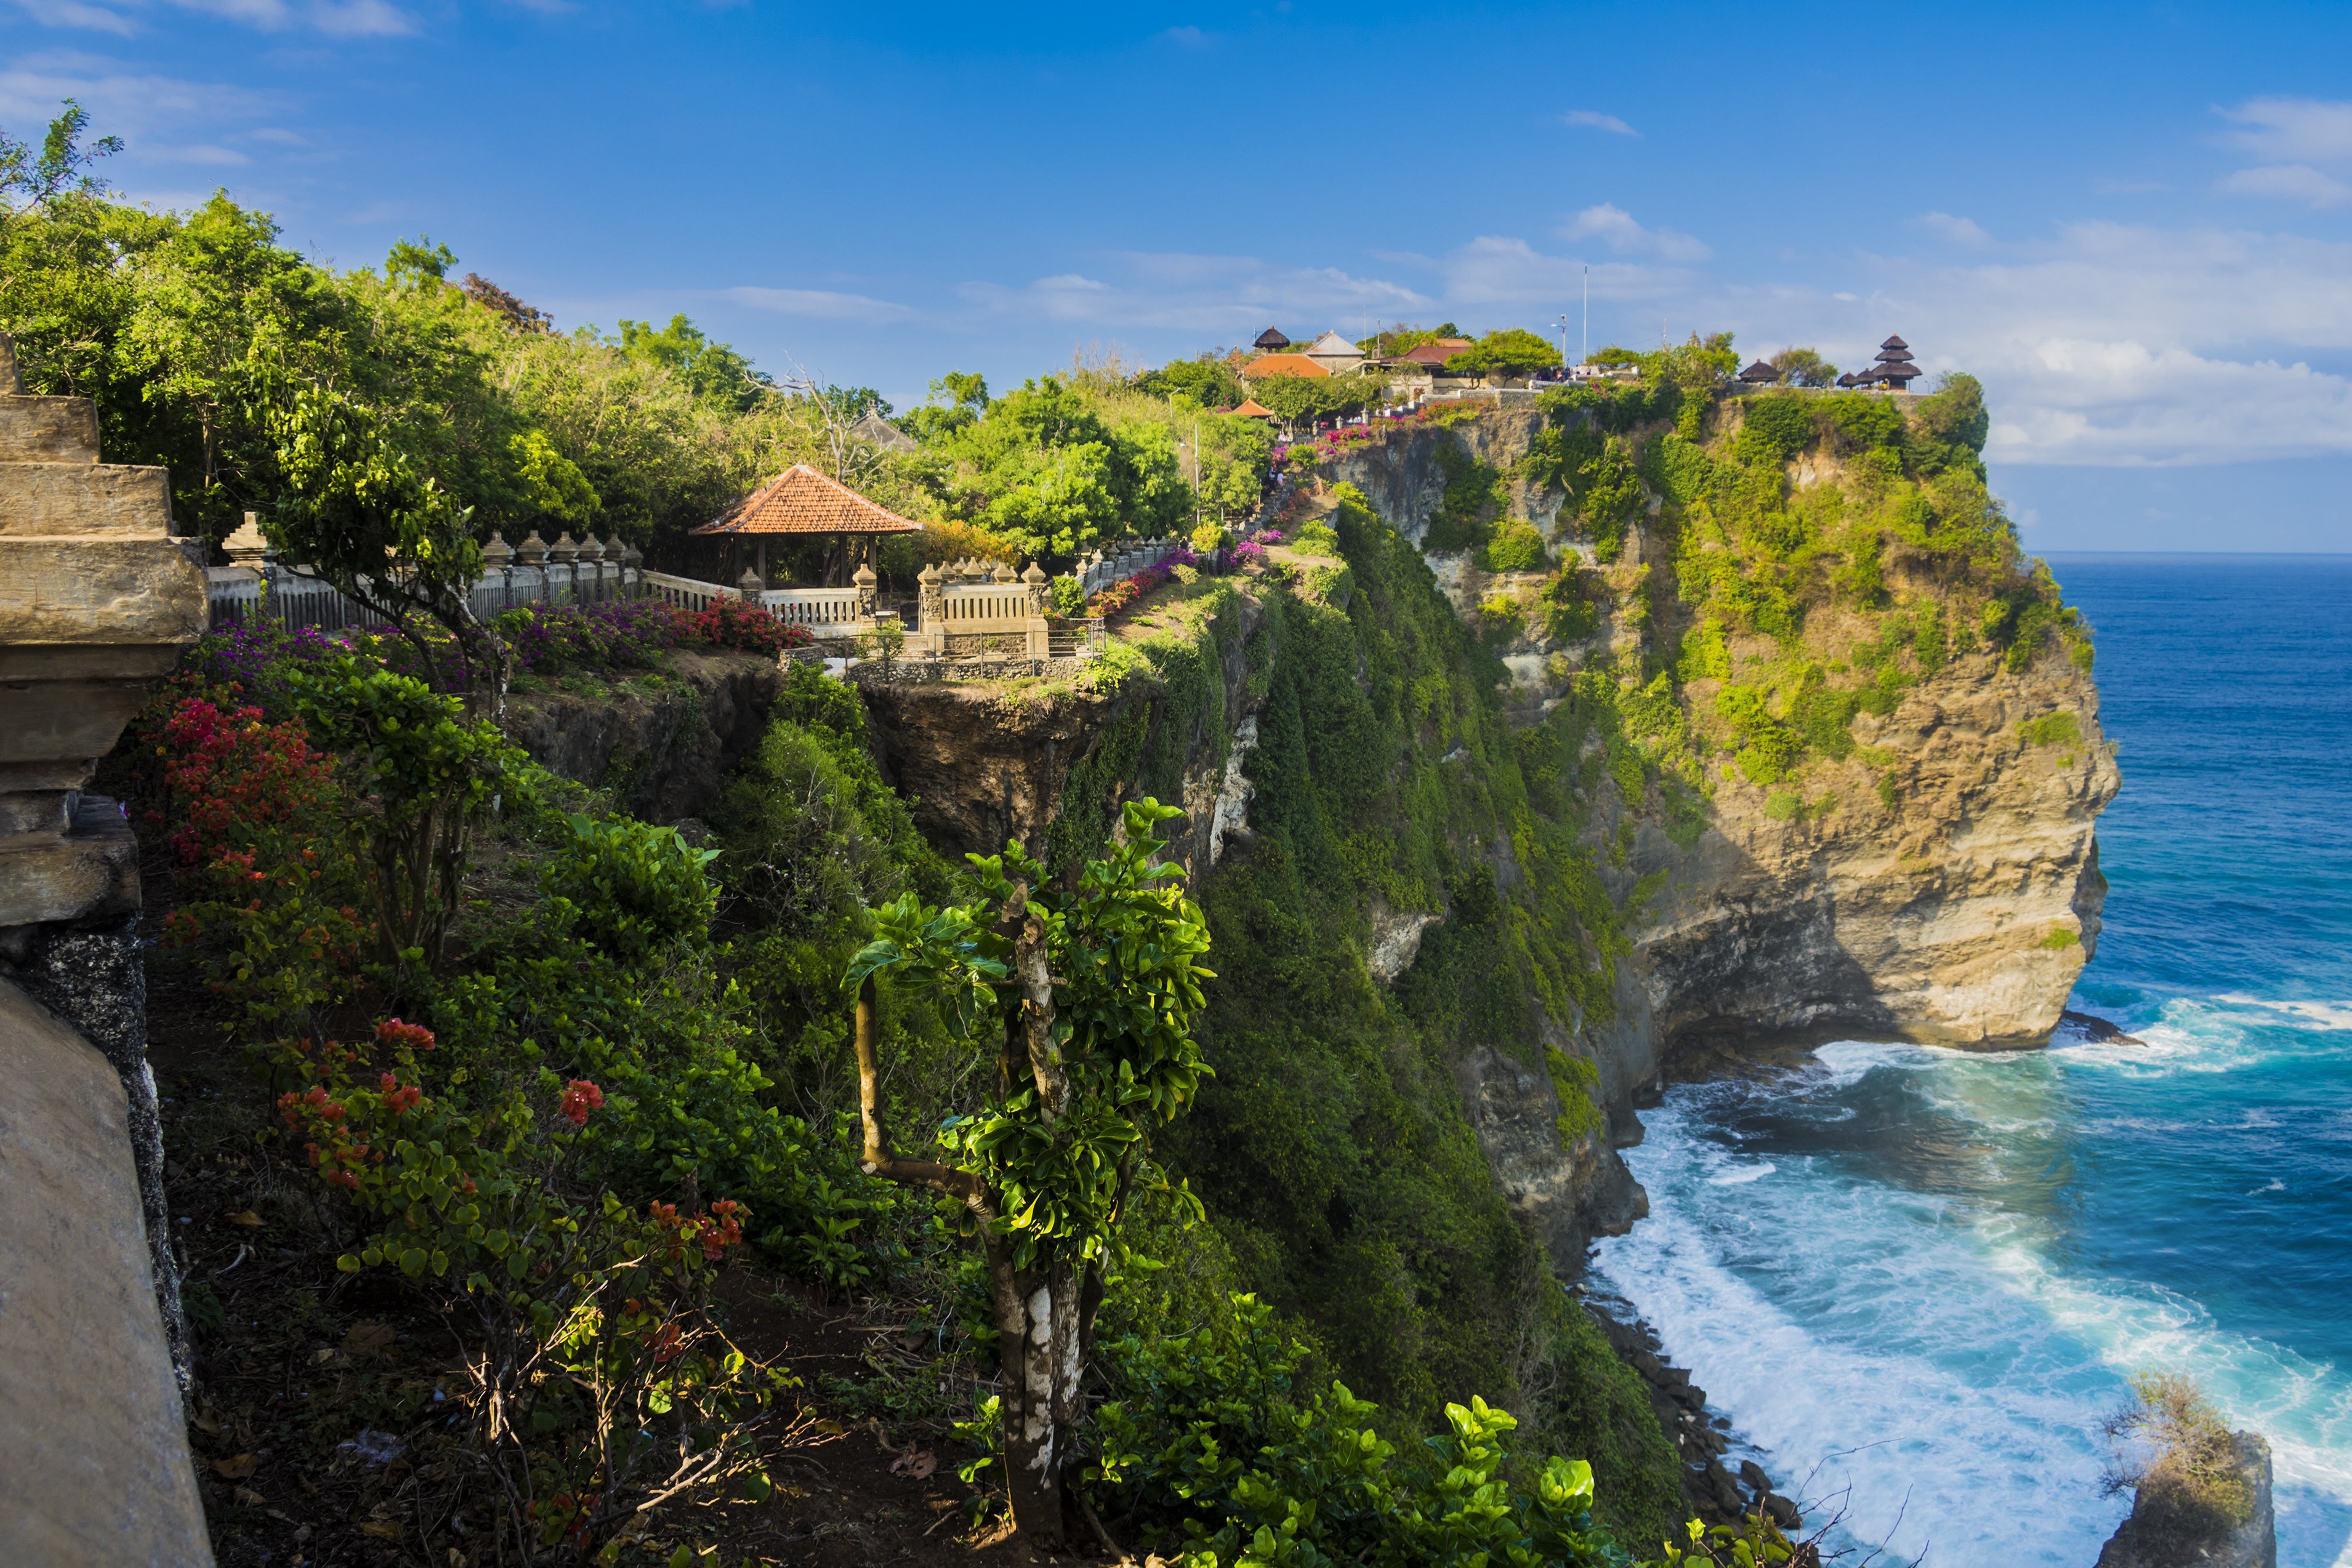 Uluwatu Temple in Bali, Indonesia’s most visited island. A former president bemoans the lack of recognition for the rest of the country. Photo: Getty Images